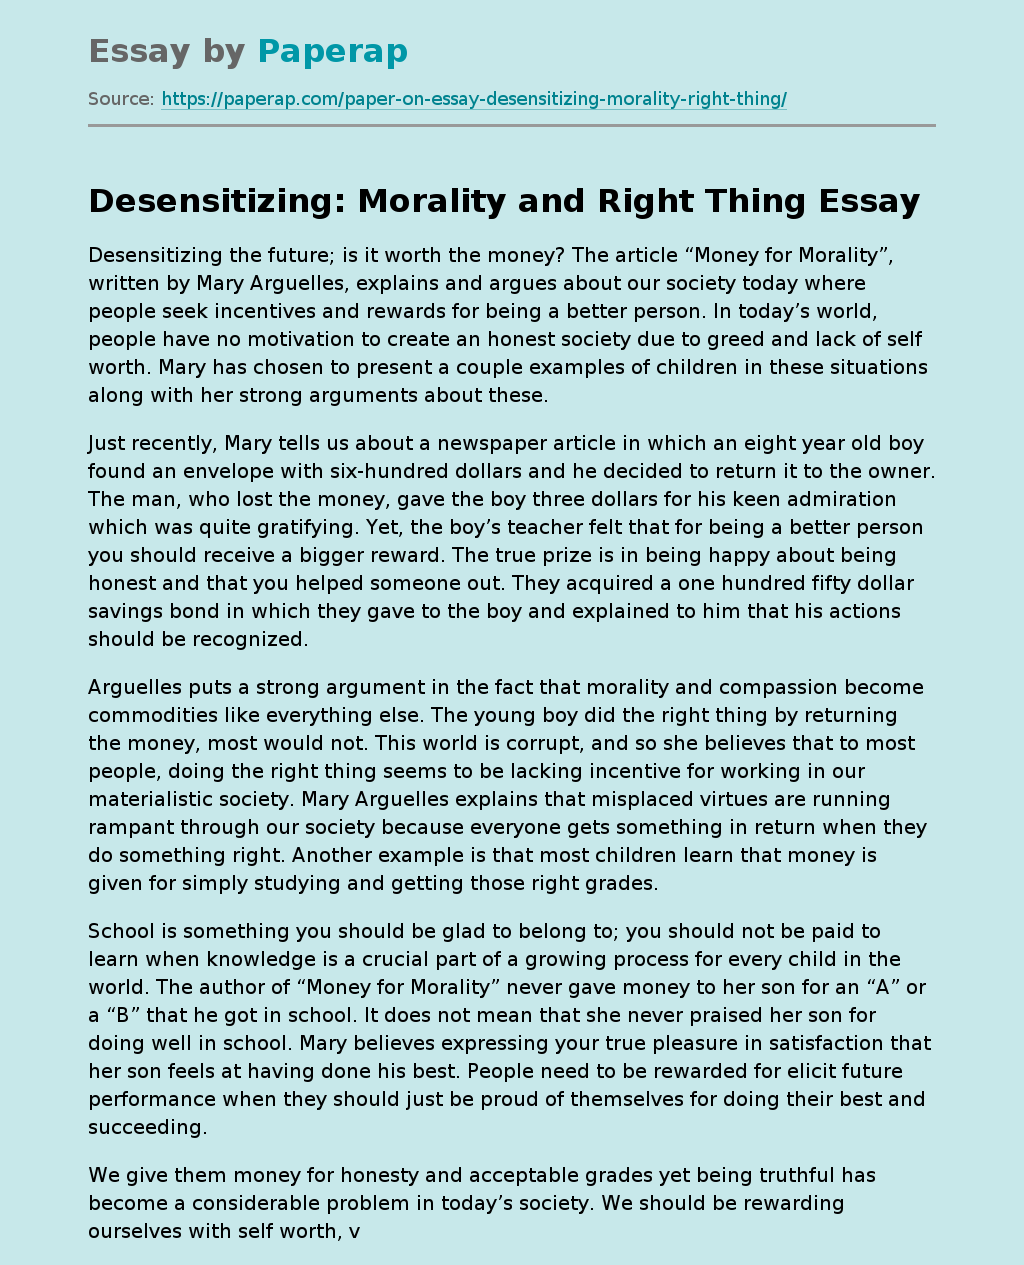 Desensitizing: Morality and Right Thing